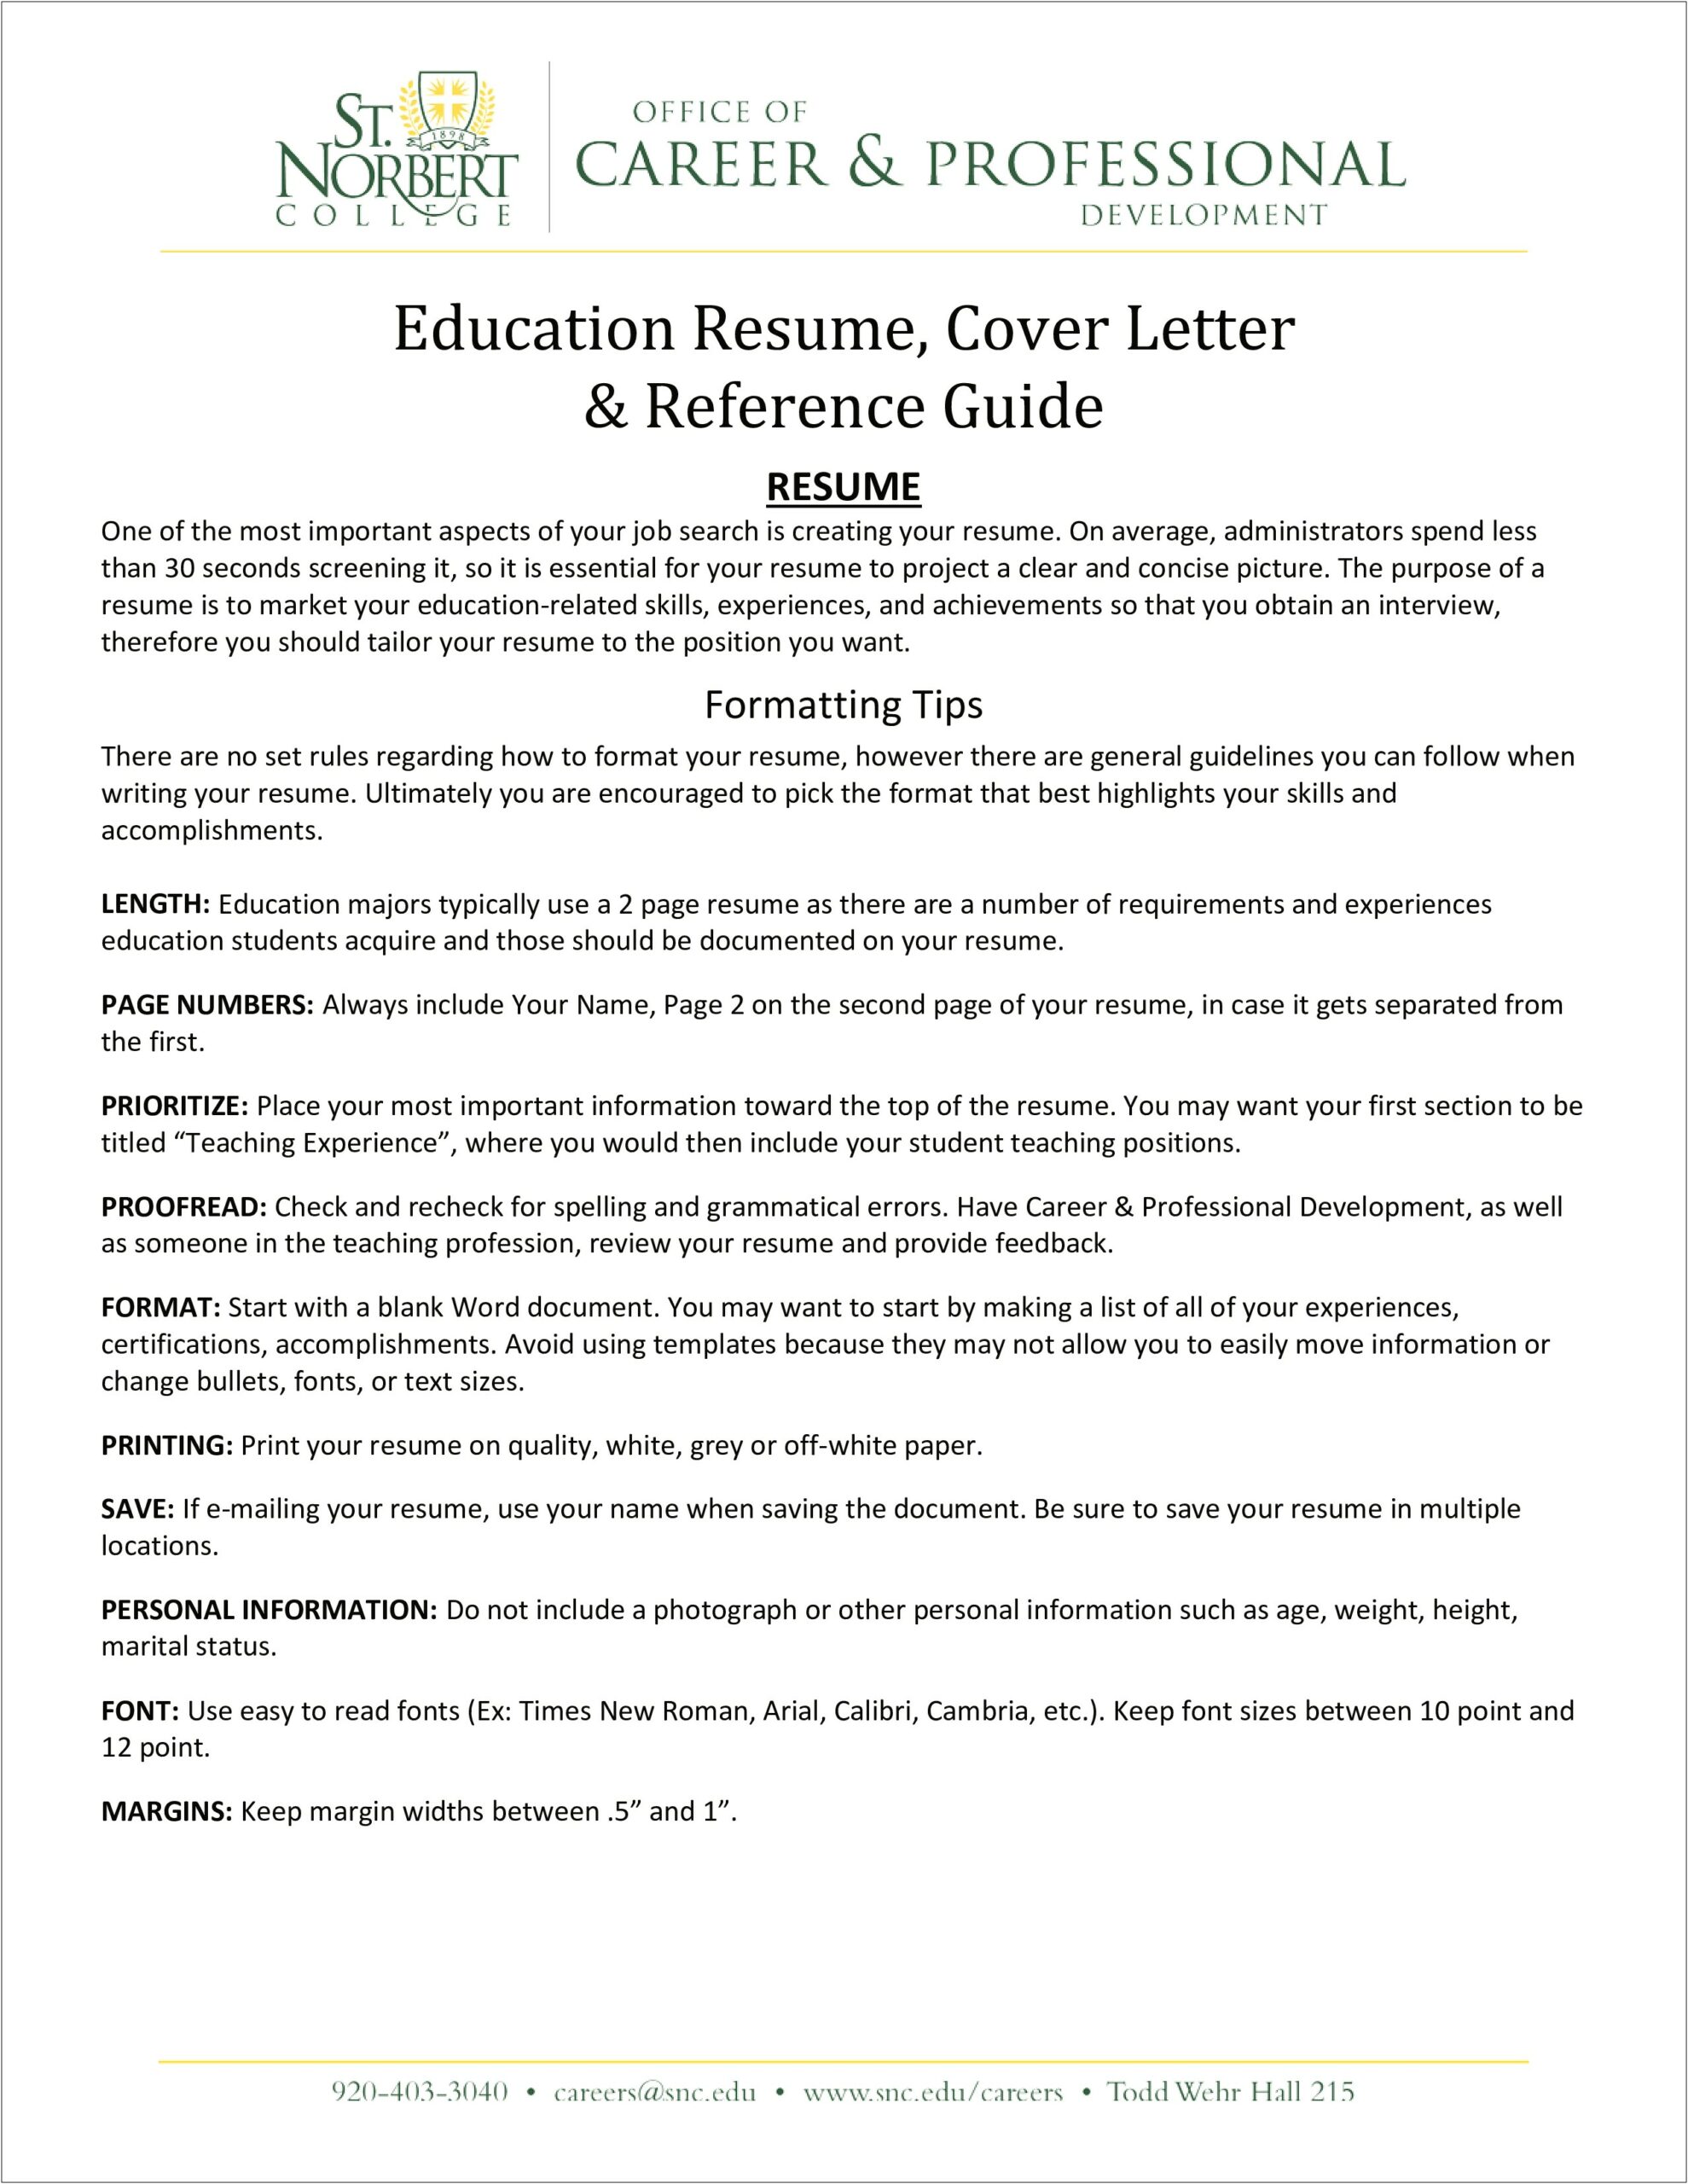 Font To Use For Cover Letter And Resume